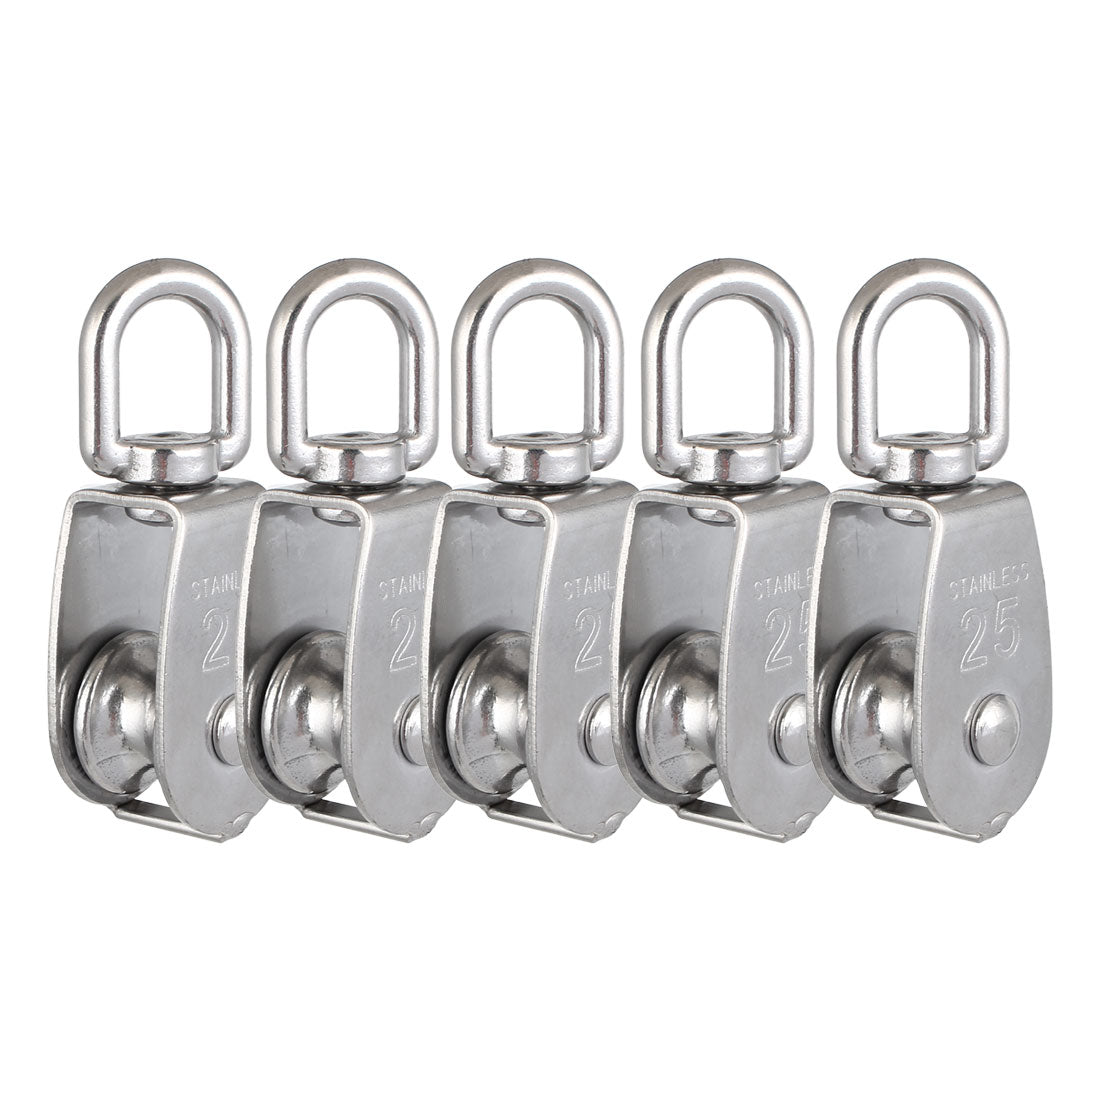 uxcell Uxcell M25 304 Stainless Steel Single Wheel Swivel Snatch Pulley Block 5 Pcs